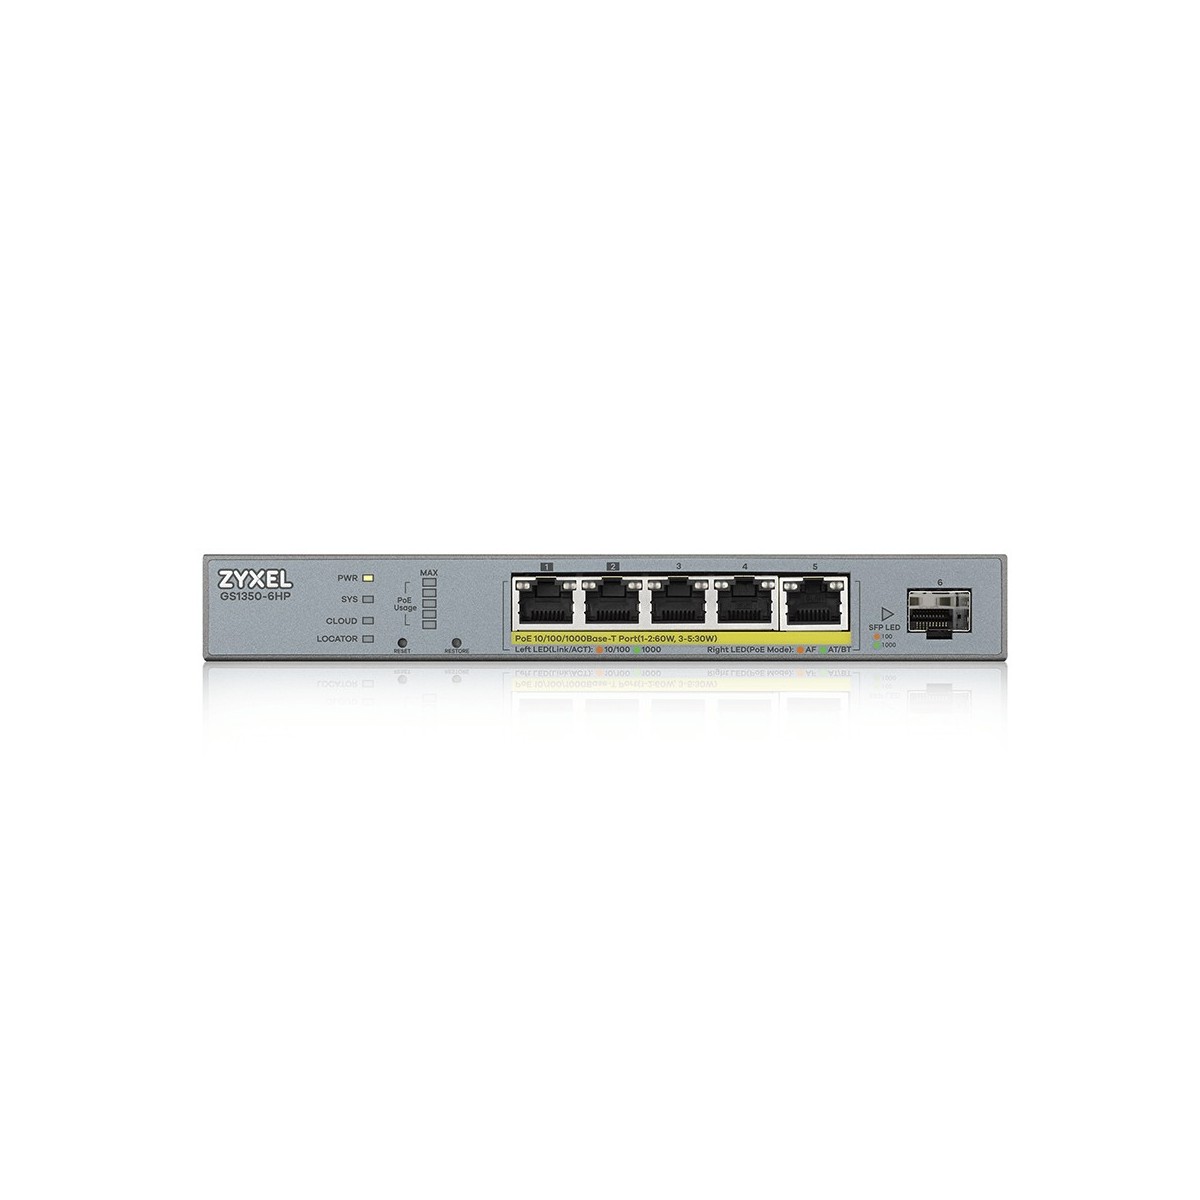 ZyXEL GS1350-6HP-EU0101F - Managed - L2 - Gigabit Ethernet (10/100/1000) - Power over Ethernet (PoE) - Wall mountable